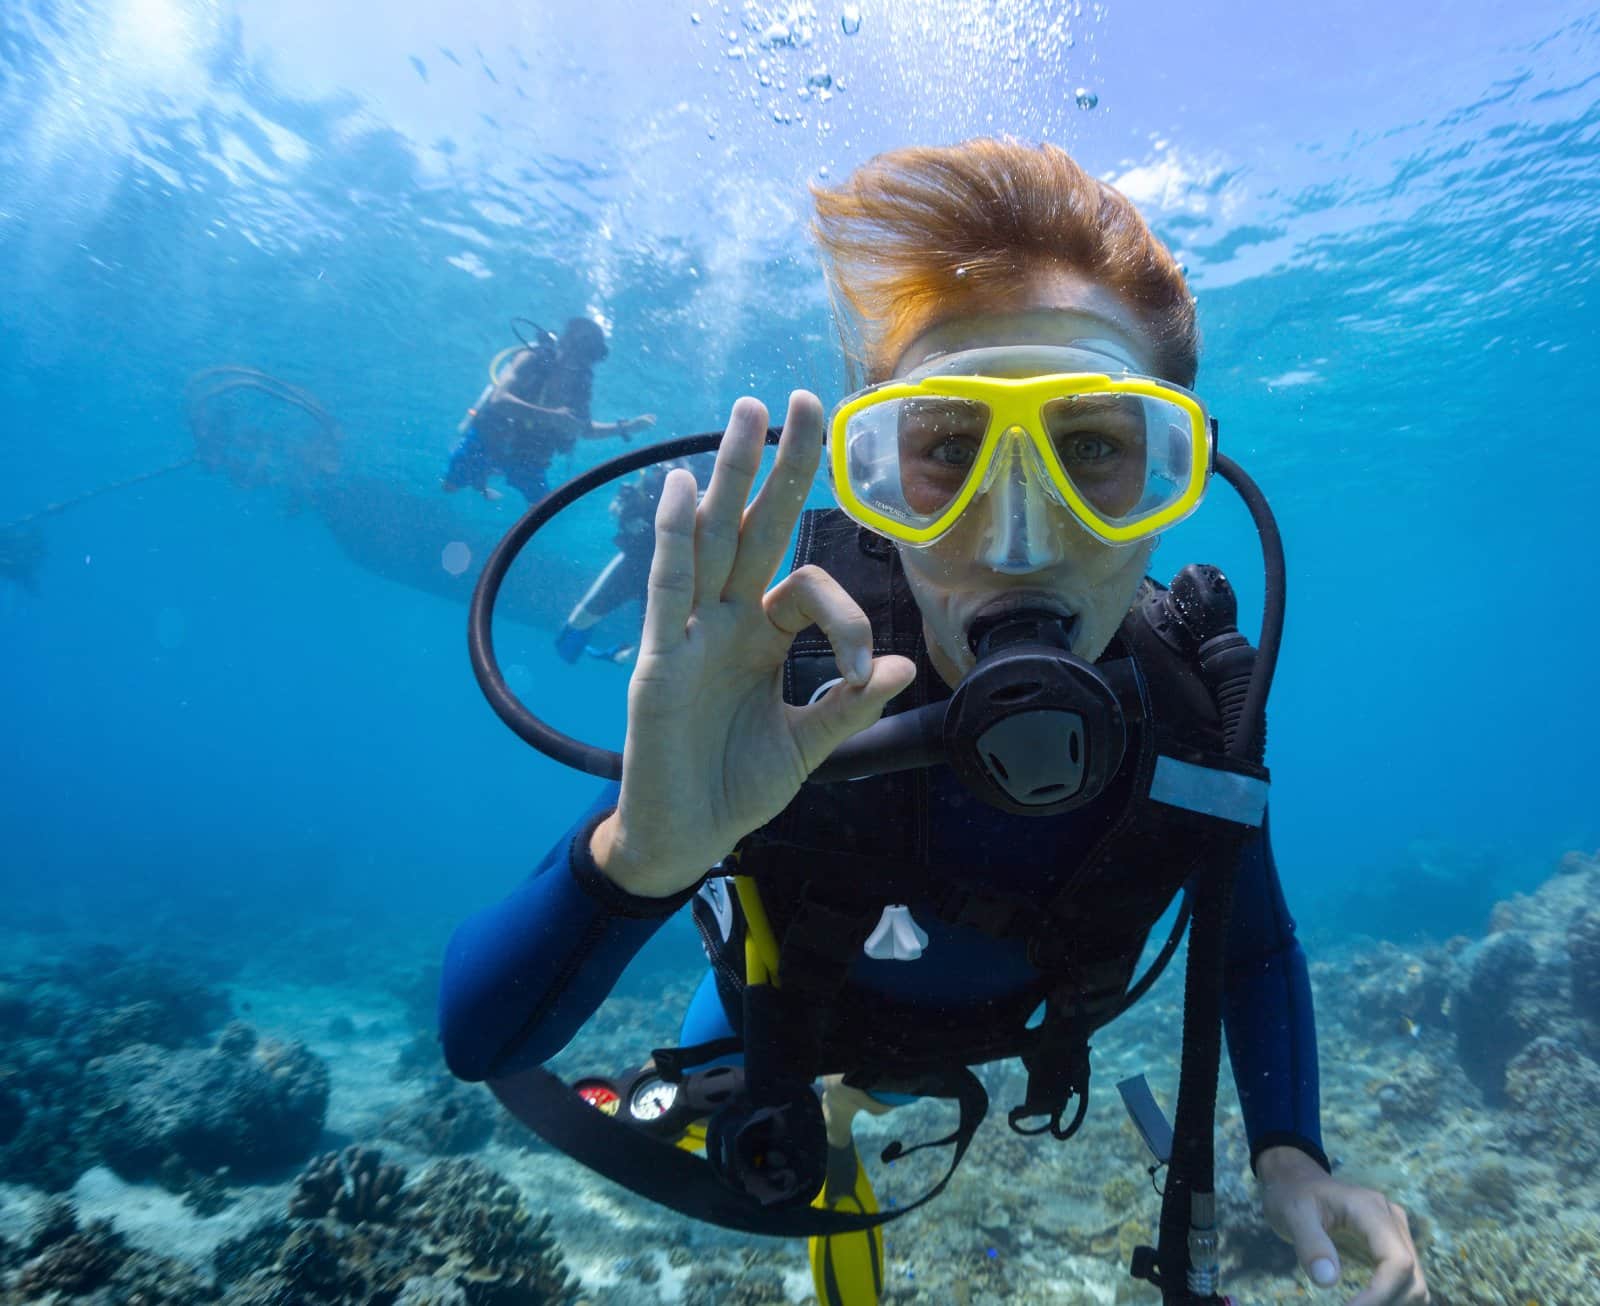 <p class="wp-caption-text">Image Credit: Shutterstock / Dudarev Mikhail</p>  <p><span>The PADI Rescue Diver course is a pivotal step in a diver’s education, focusing on stress management, emergency prevention, and rescue techniques. It’s designed to teach you how to become a better buddy by practicing problem-solving skills until they become second nature.</span></p> <p><span>The course covers self-rescue, recognizing and managing stress in other divers, emergency management and equipment, and rescuing panicked and unresponsive divers. Completing this course enhances your ability to think and act in an emergency, making diving safer and more enjoyable for you and those around you.</span></p> <p><b>Insider’s Tip:</b><span> Before embarking on the Rescue Diver course, ensure you are comfortable with your basic diving skills and have a solid understanding of dive theory. This course is intensive and requires good physical fitness and a strong commitment to learning. Engage fully in the practical scenarios, as these are invaluable in preparing you for real-life situations.</span></p>